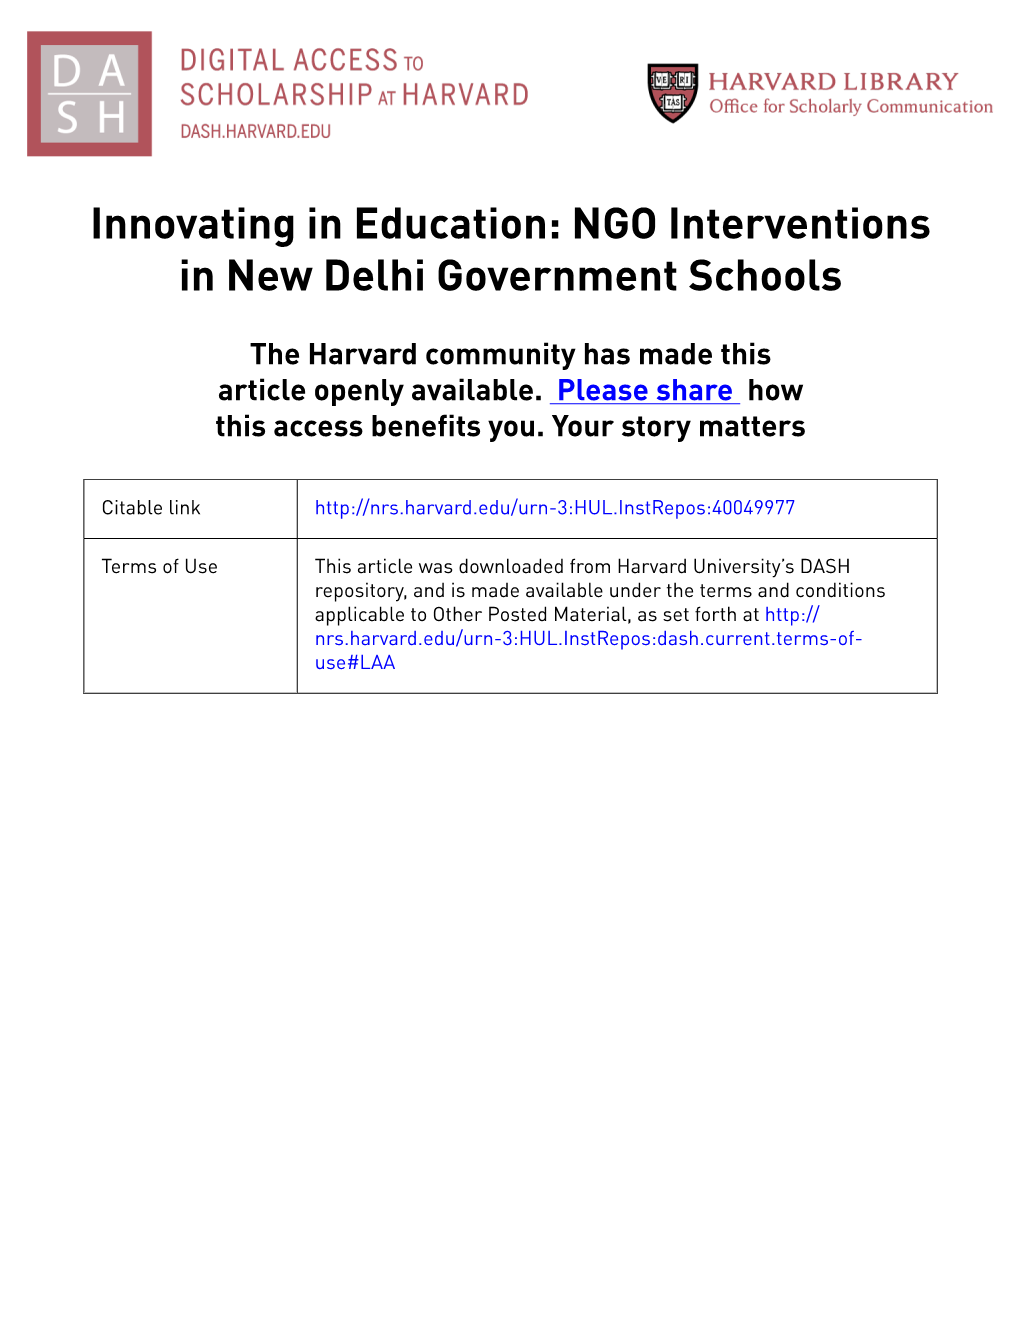 Innovating in Education: NGO Interventions in New Delhi Government Schools